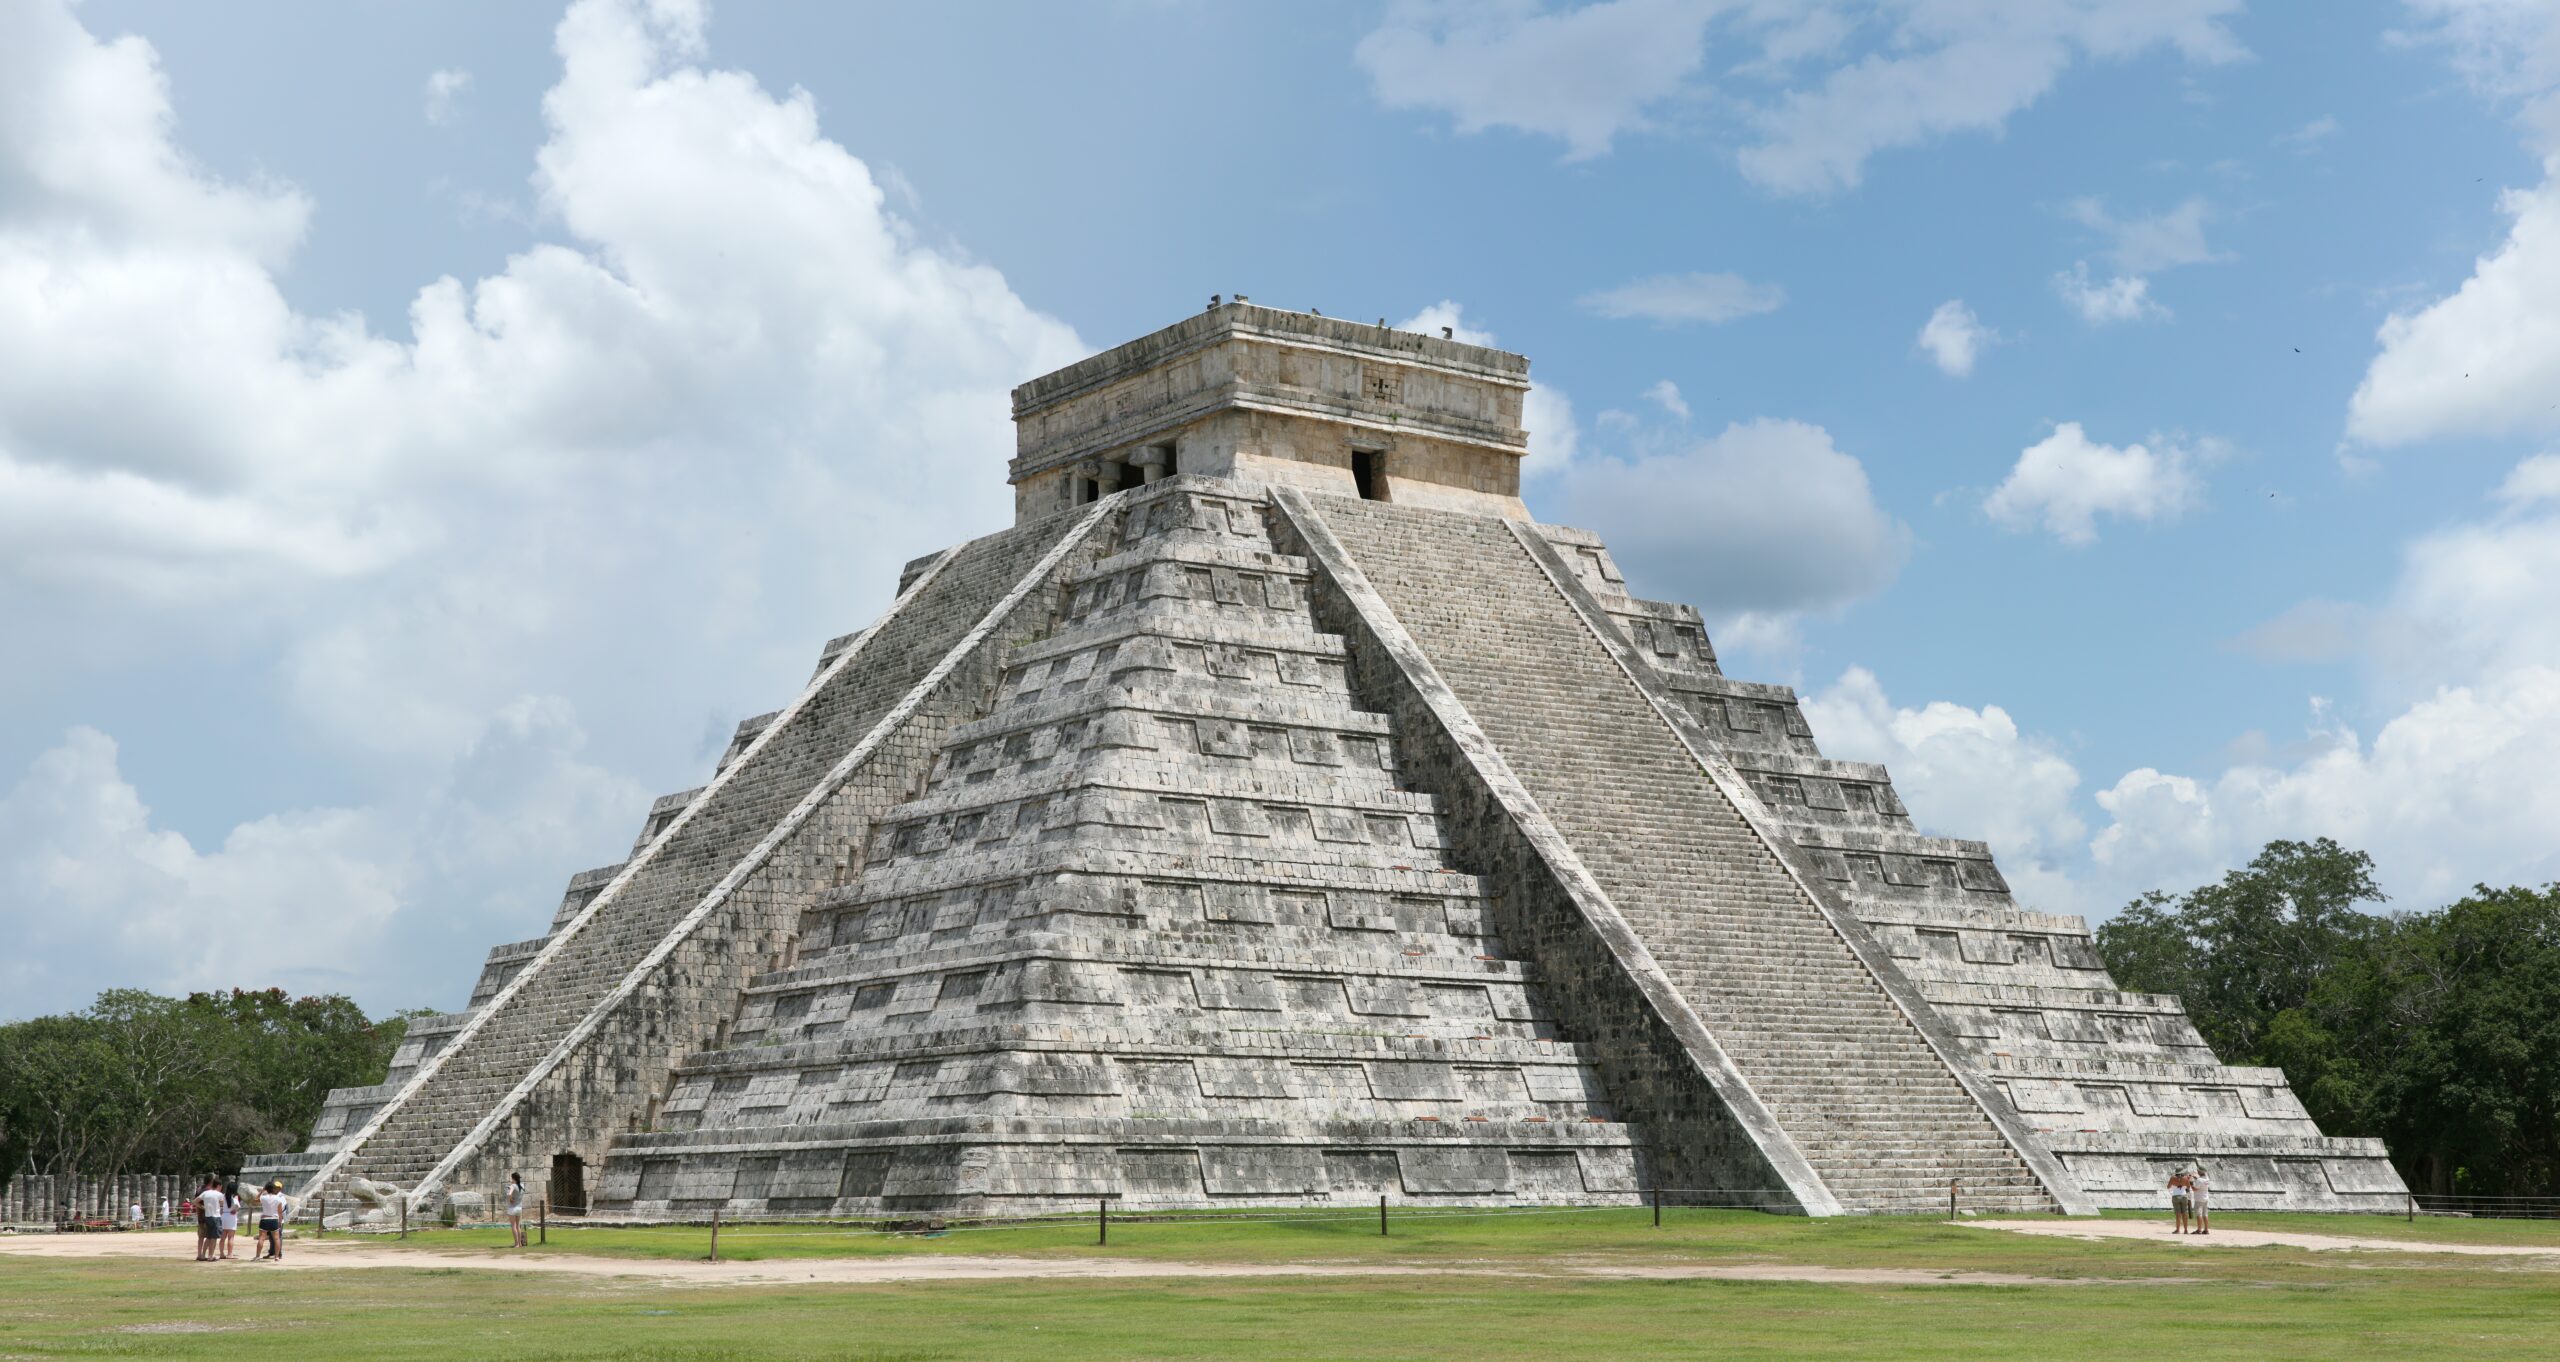 Visit the ancient ruins of Chichen Itza